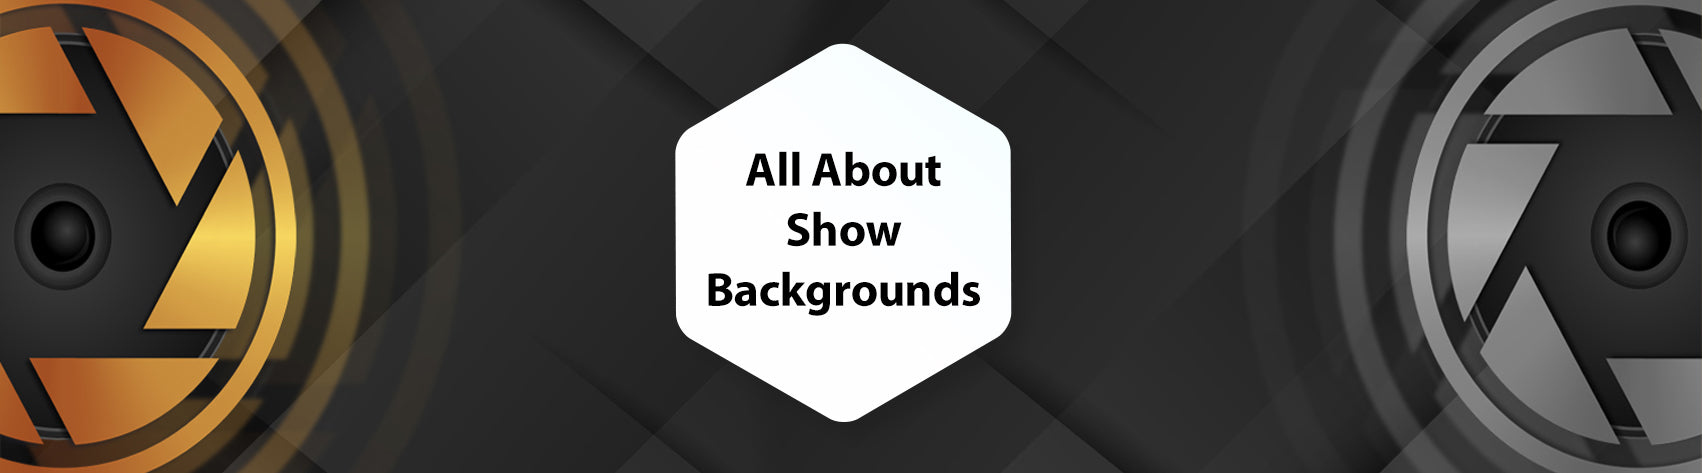 All About Show Backgrounds